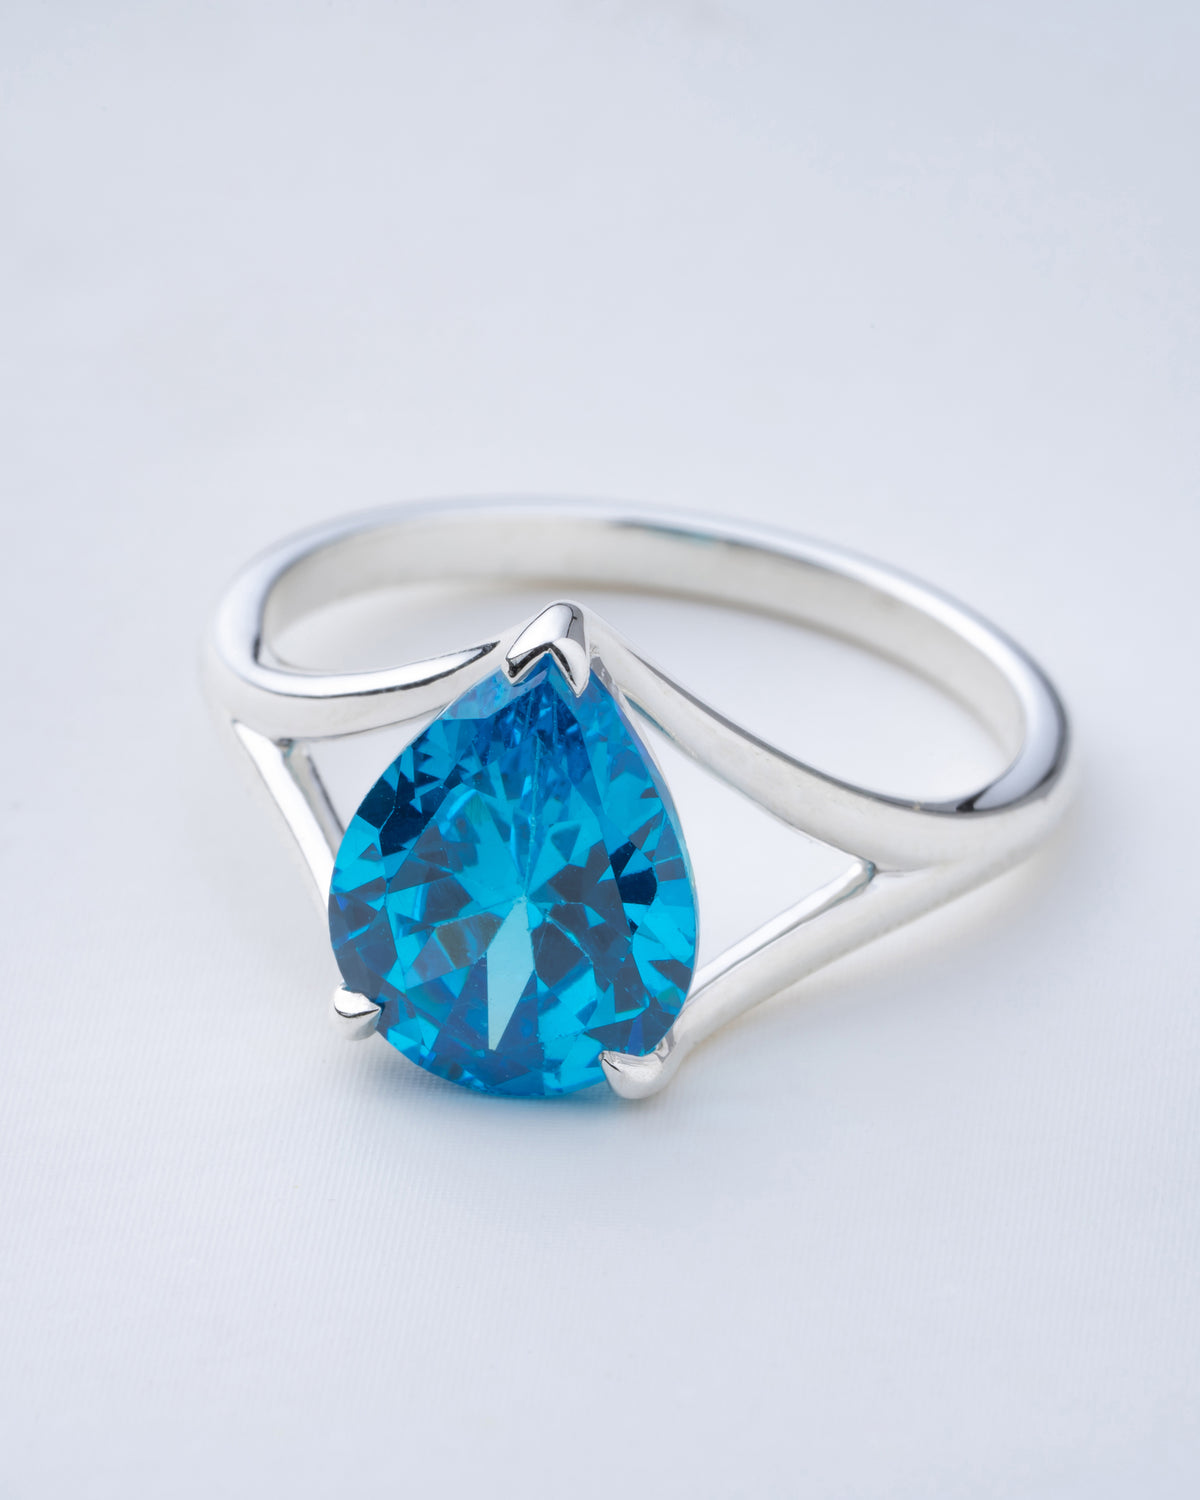 sterling silver ring, Aquamarine jewelry